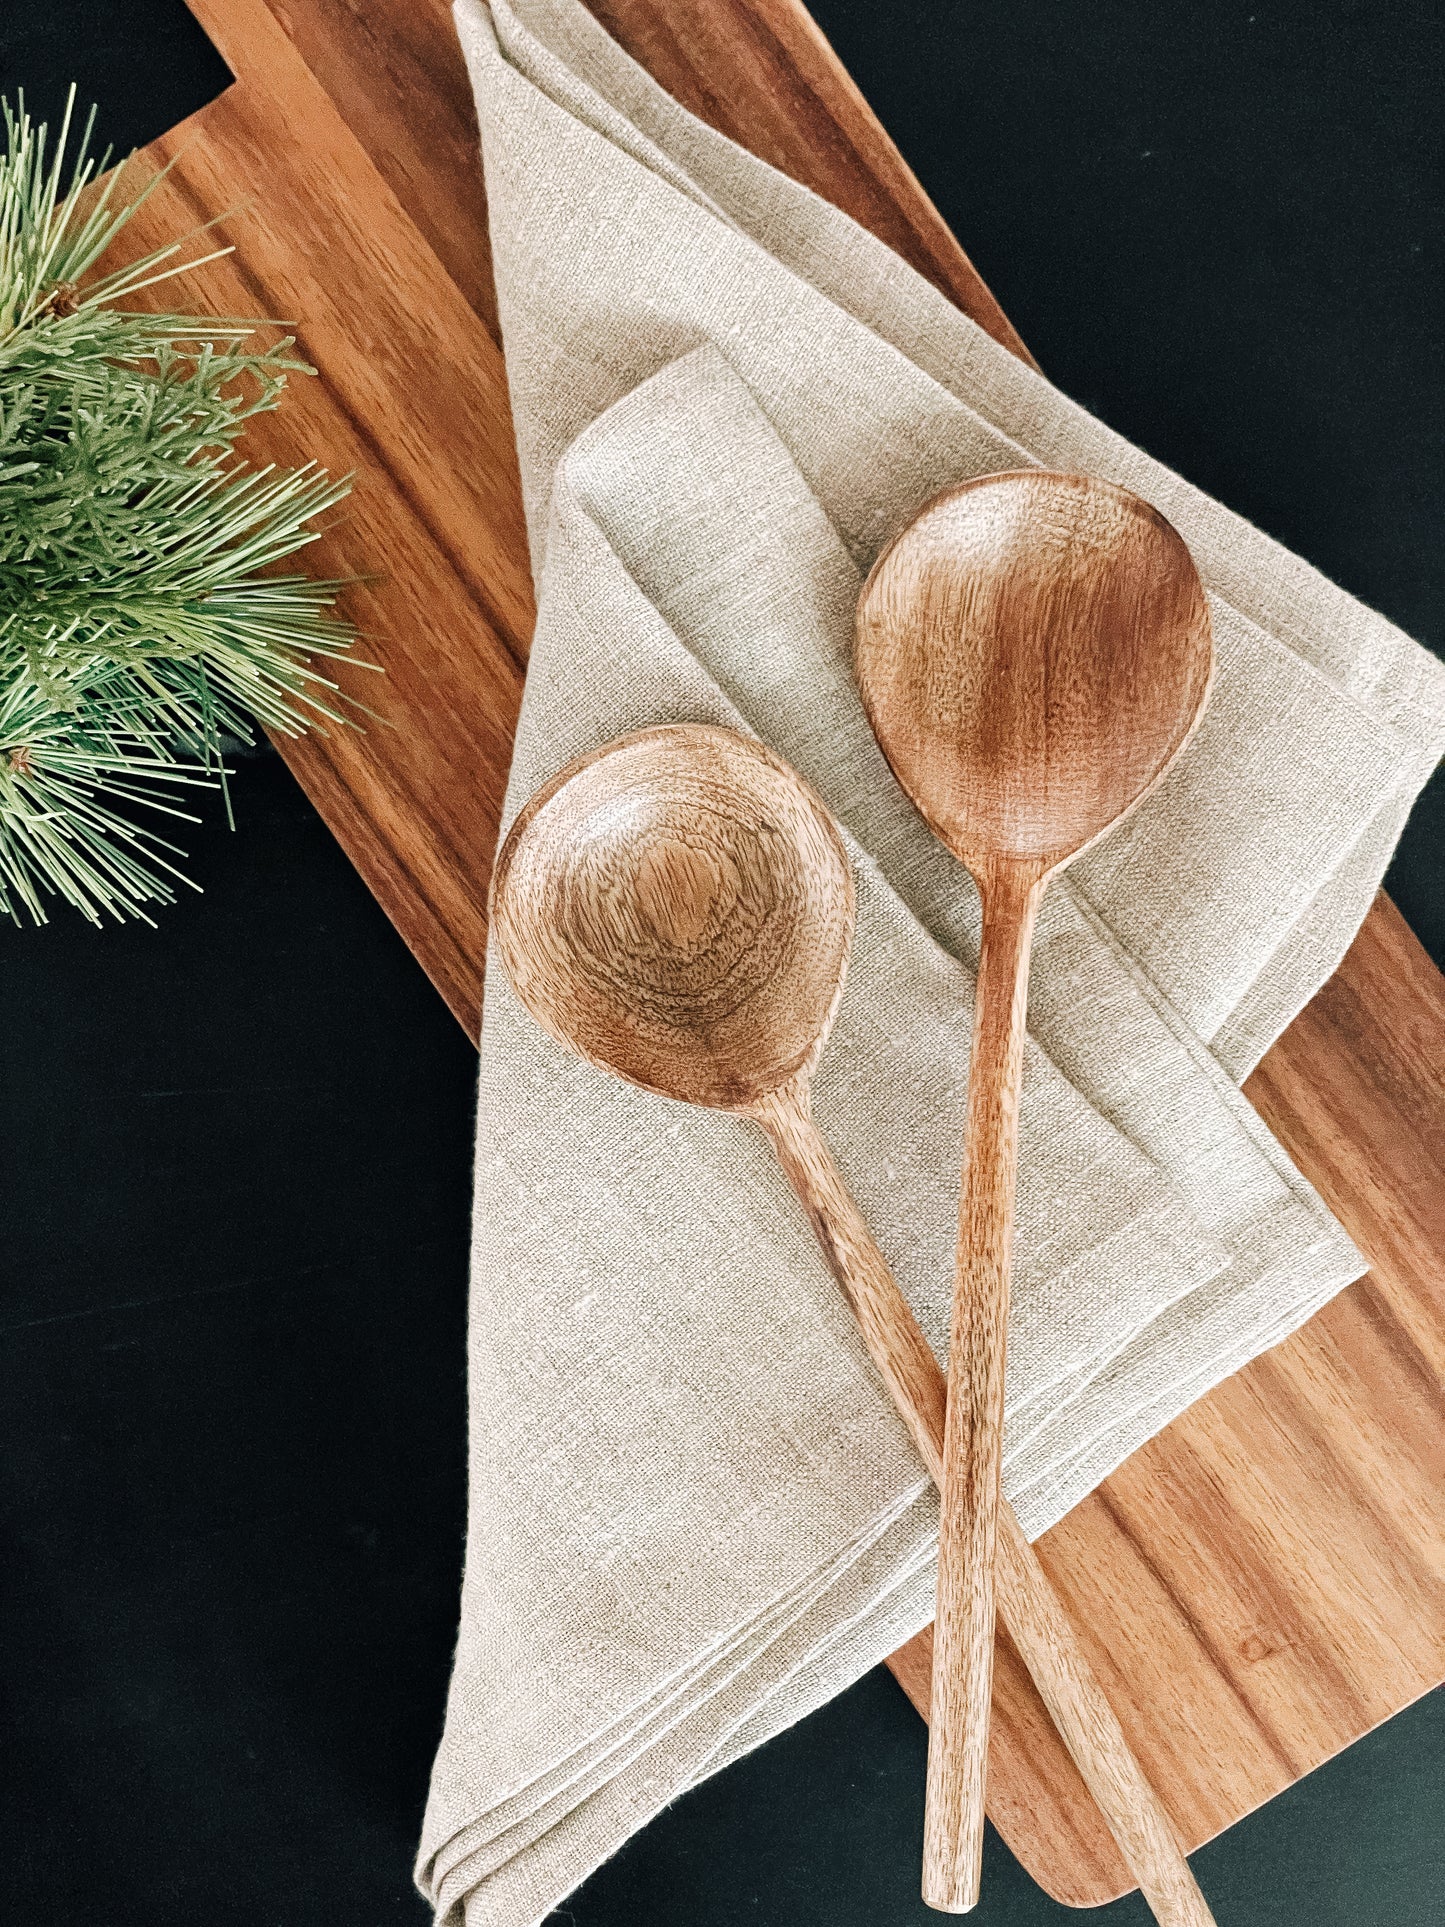 Large Round Wooden Spoon